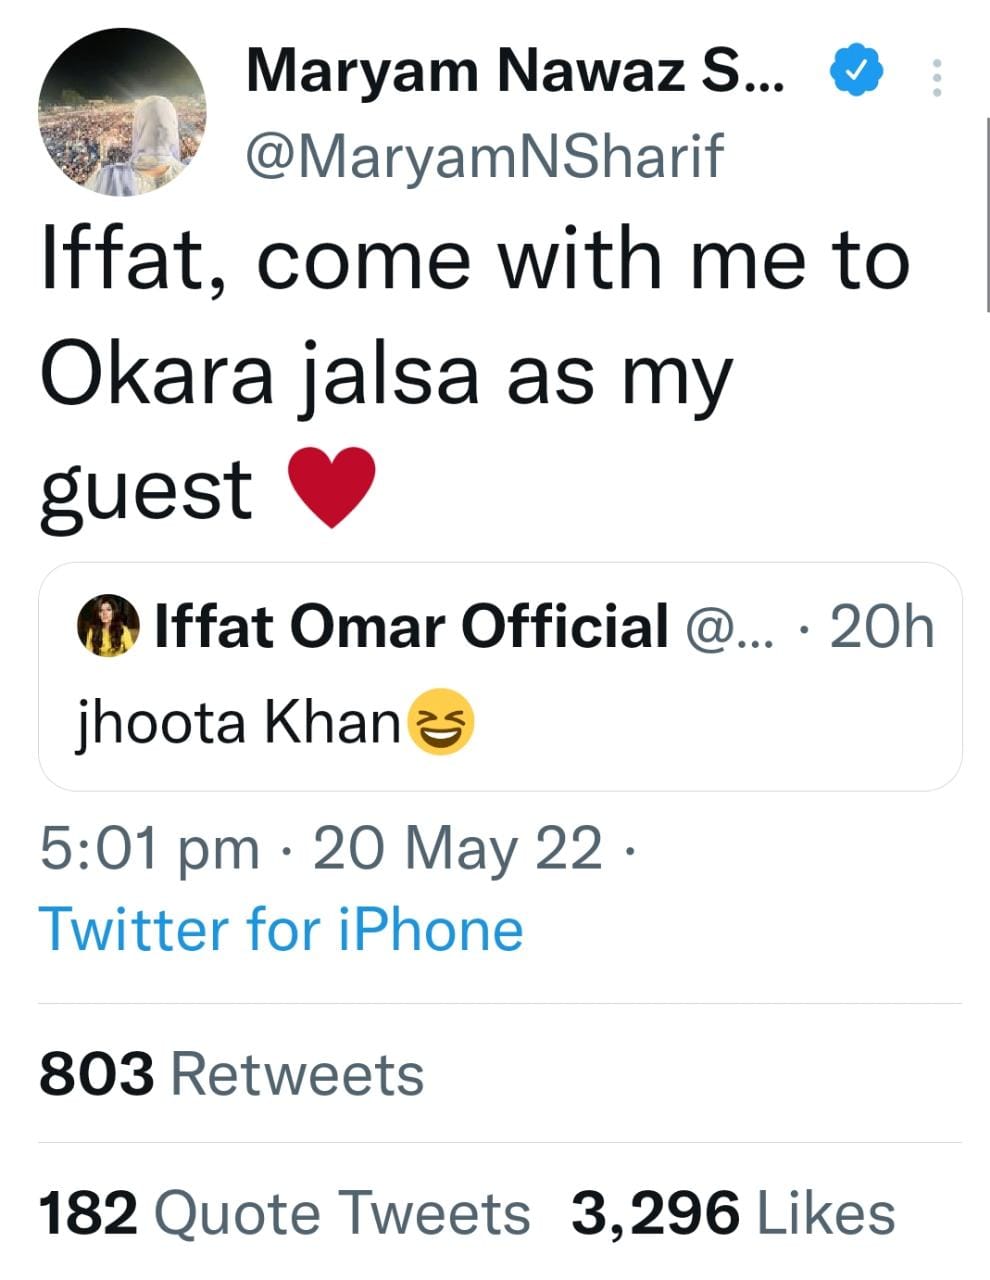 Come with me': Maryam Nawaz invites Iffat Omar to jalsa after Iffat says 'Jhoota' Imran - The Current